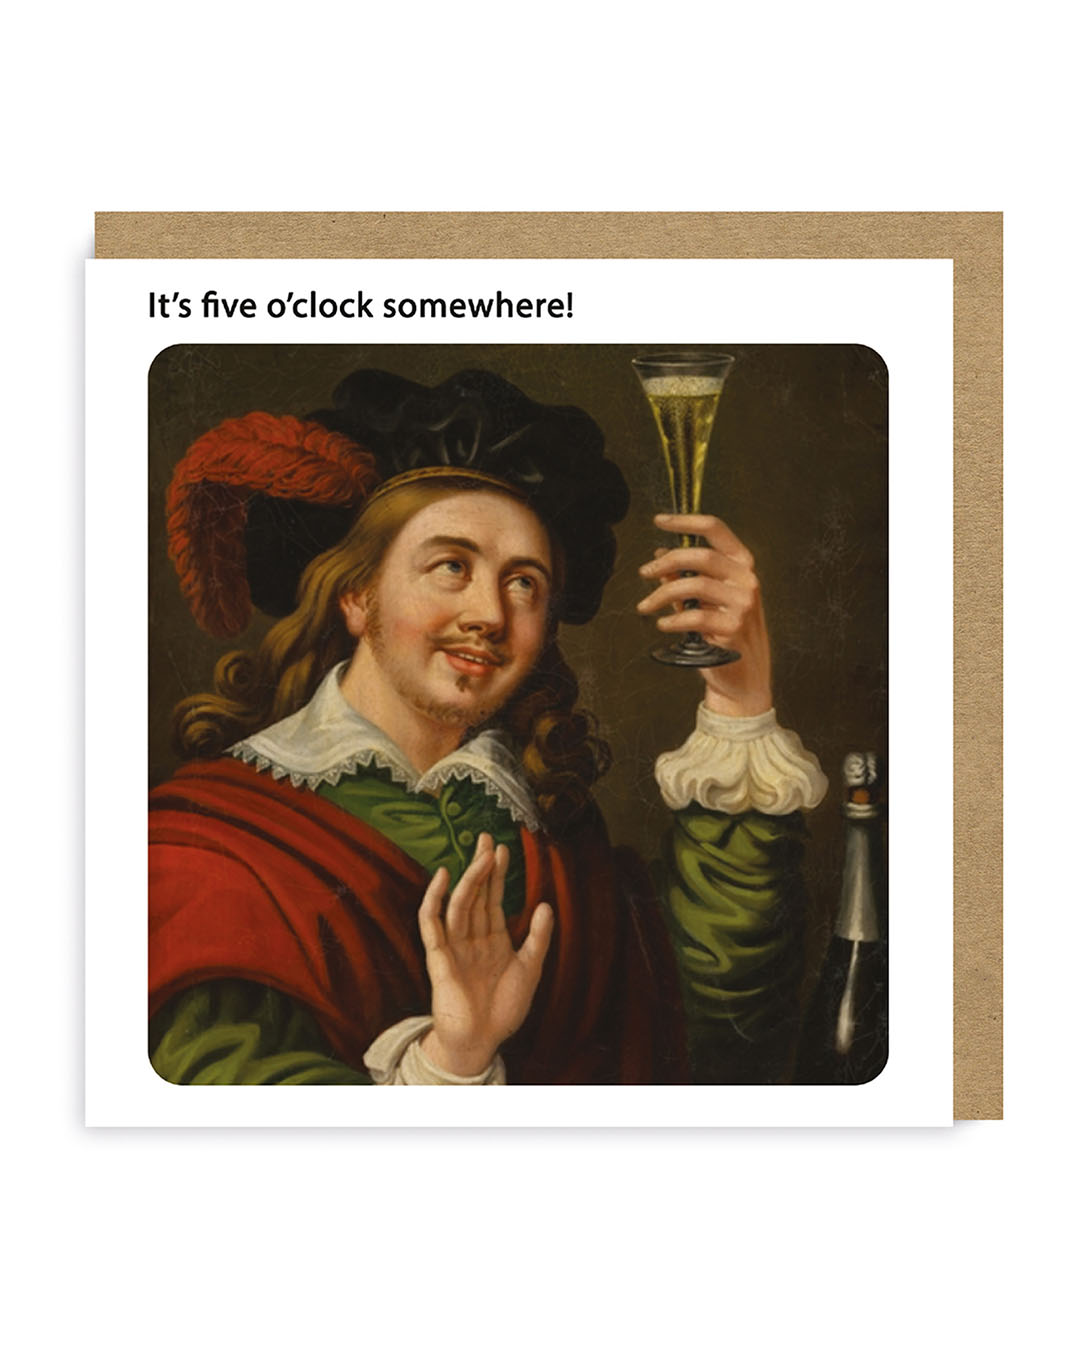 A birthday card with a man looking at an alcoholic drink